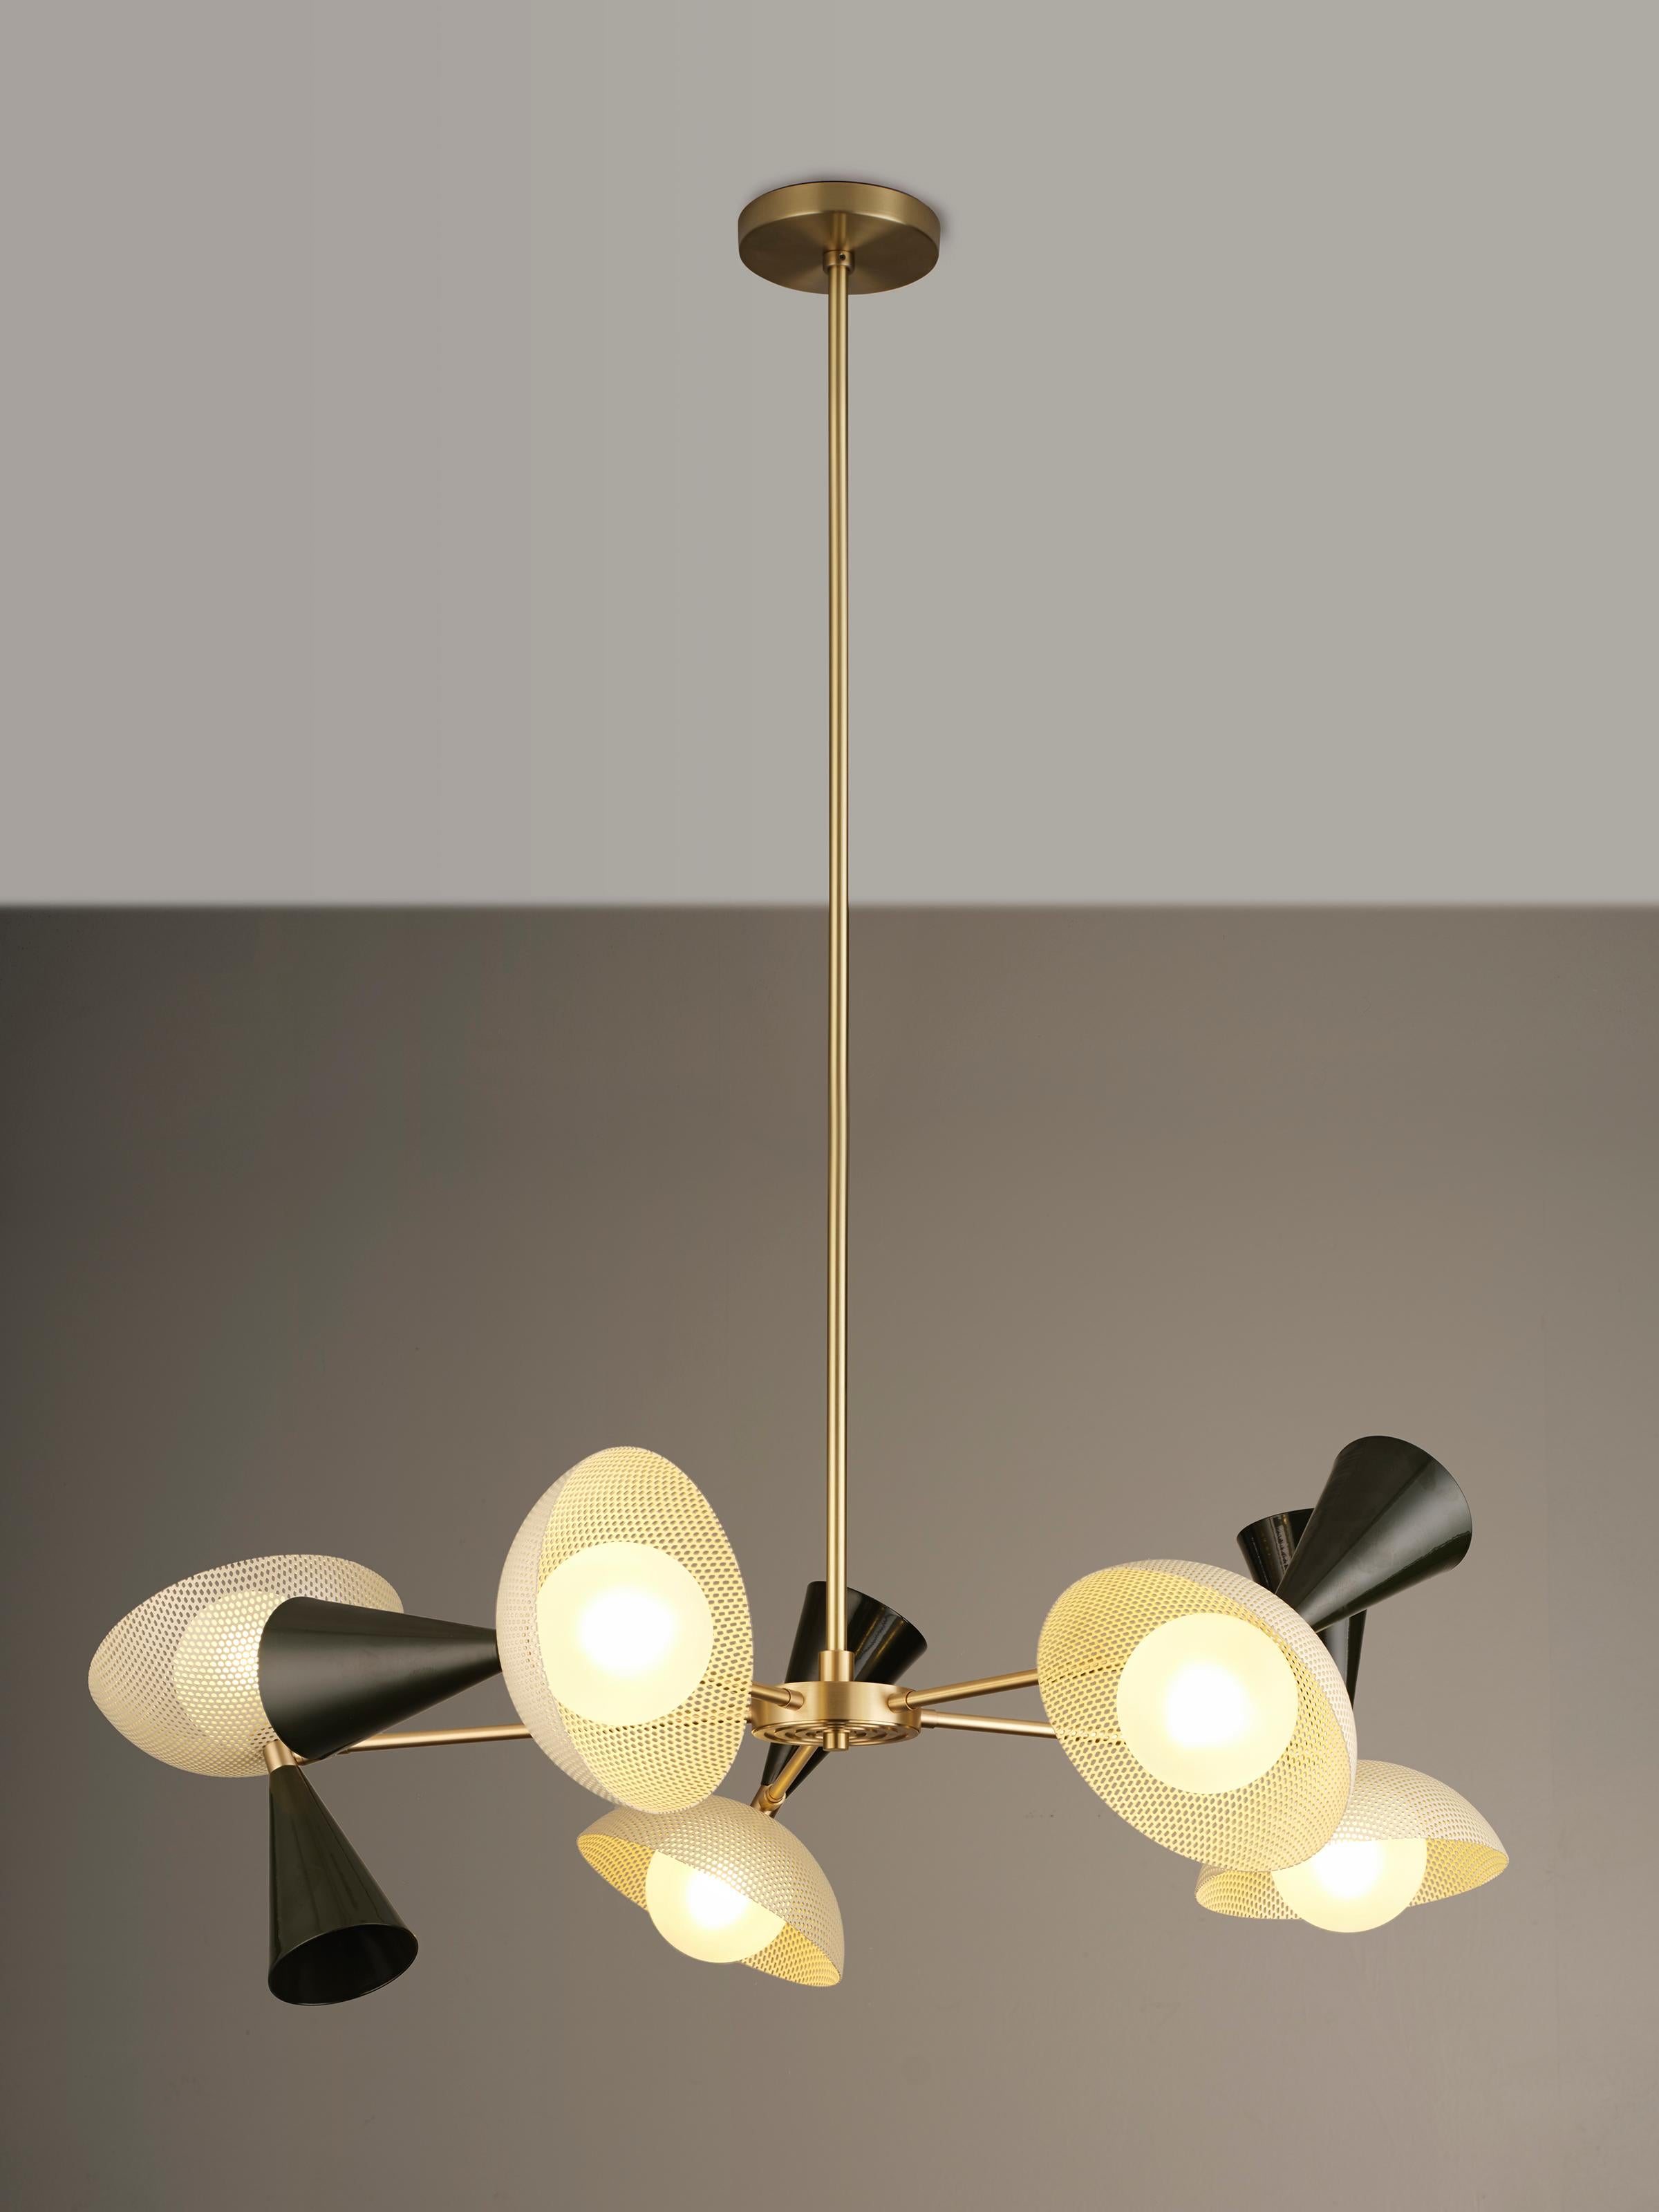 Molto 5-Arm Ceiling Fixture in Brushed Brass + Enameled Mesh, Blueprint Lighting 1